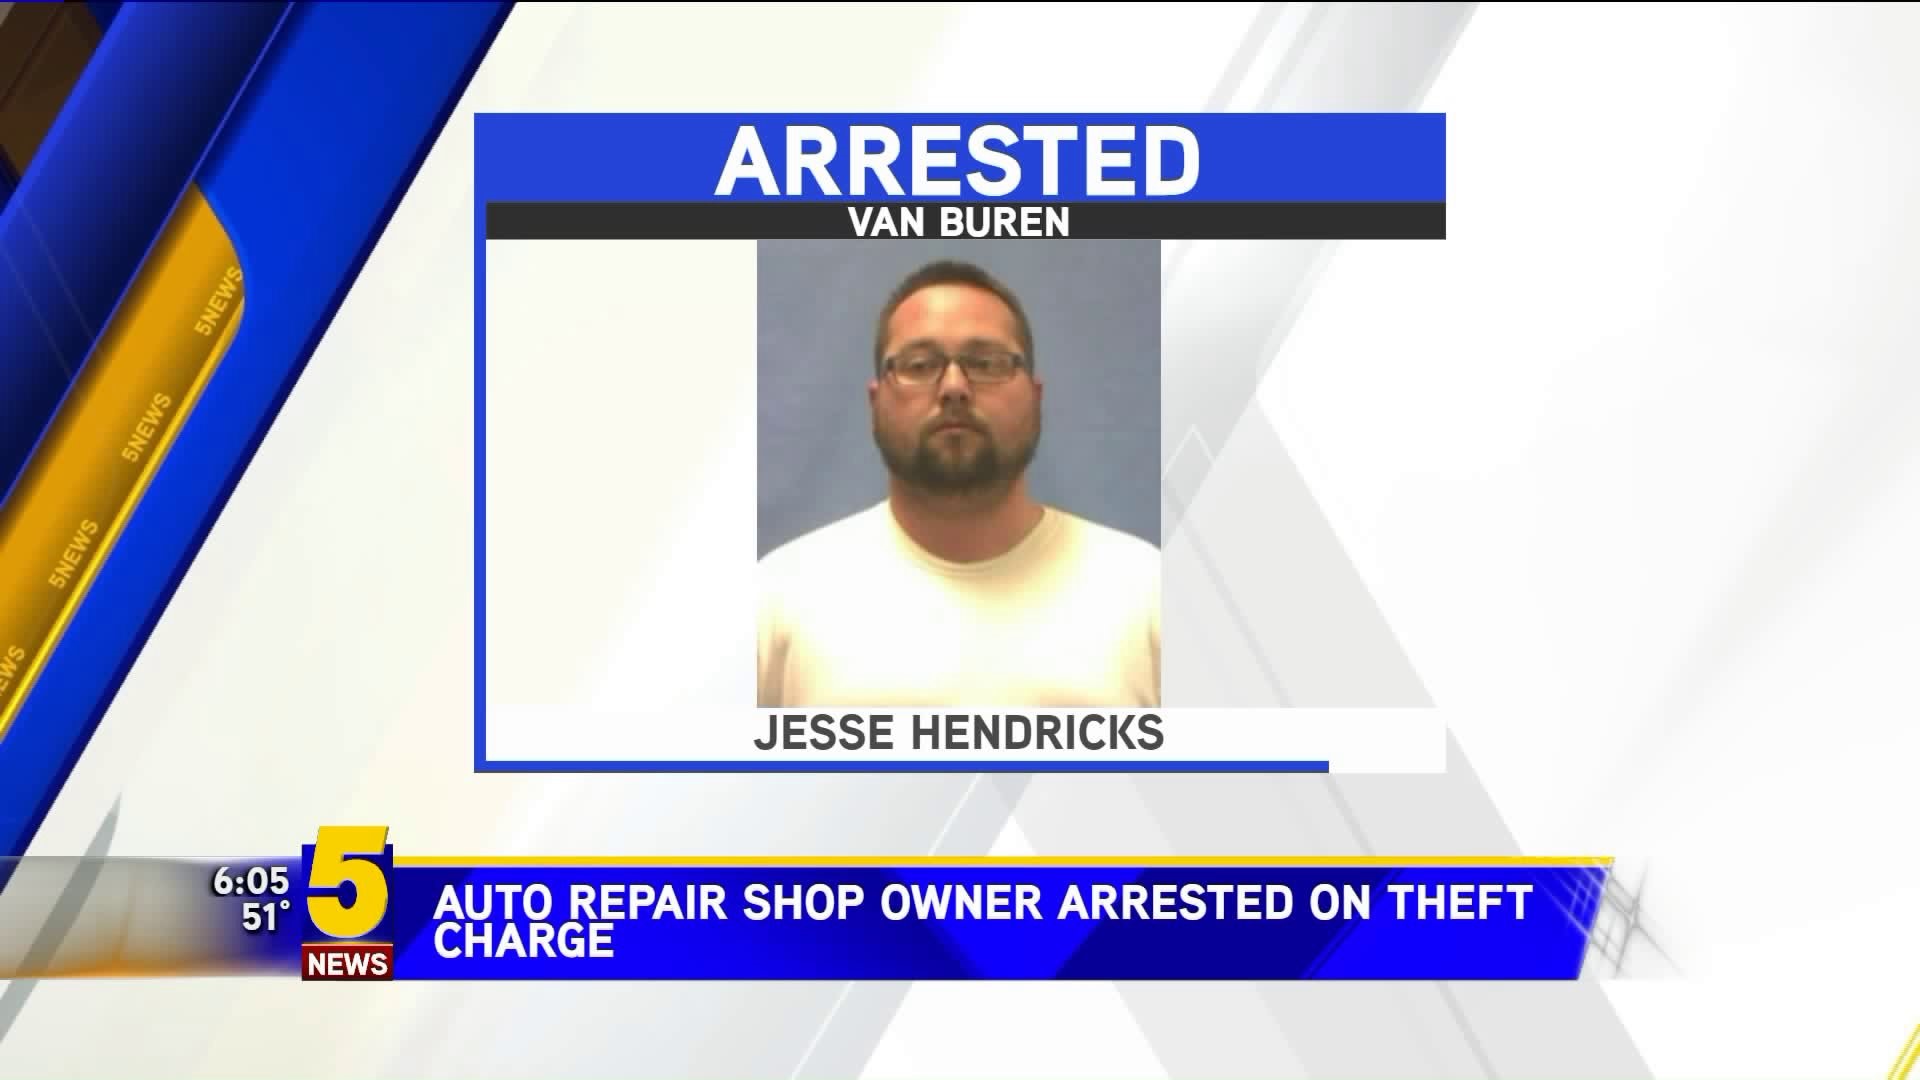 Auto-Repair Shop Owner Arrested on Theft